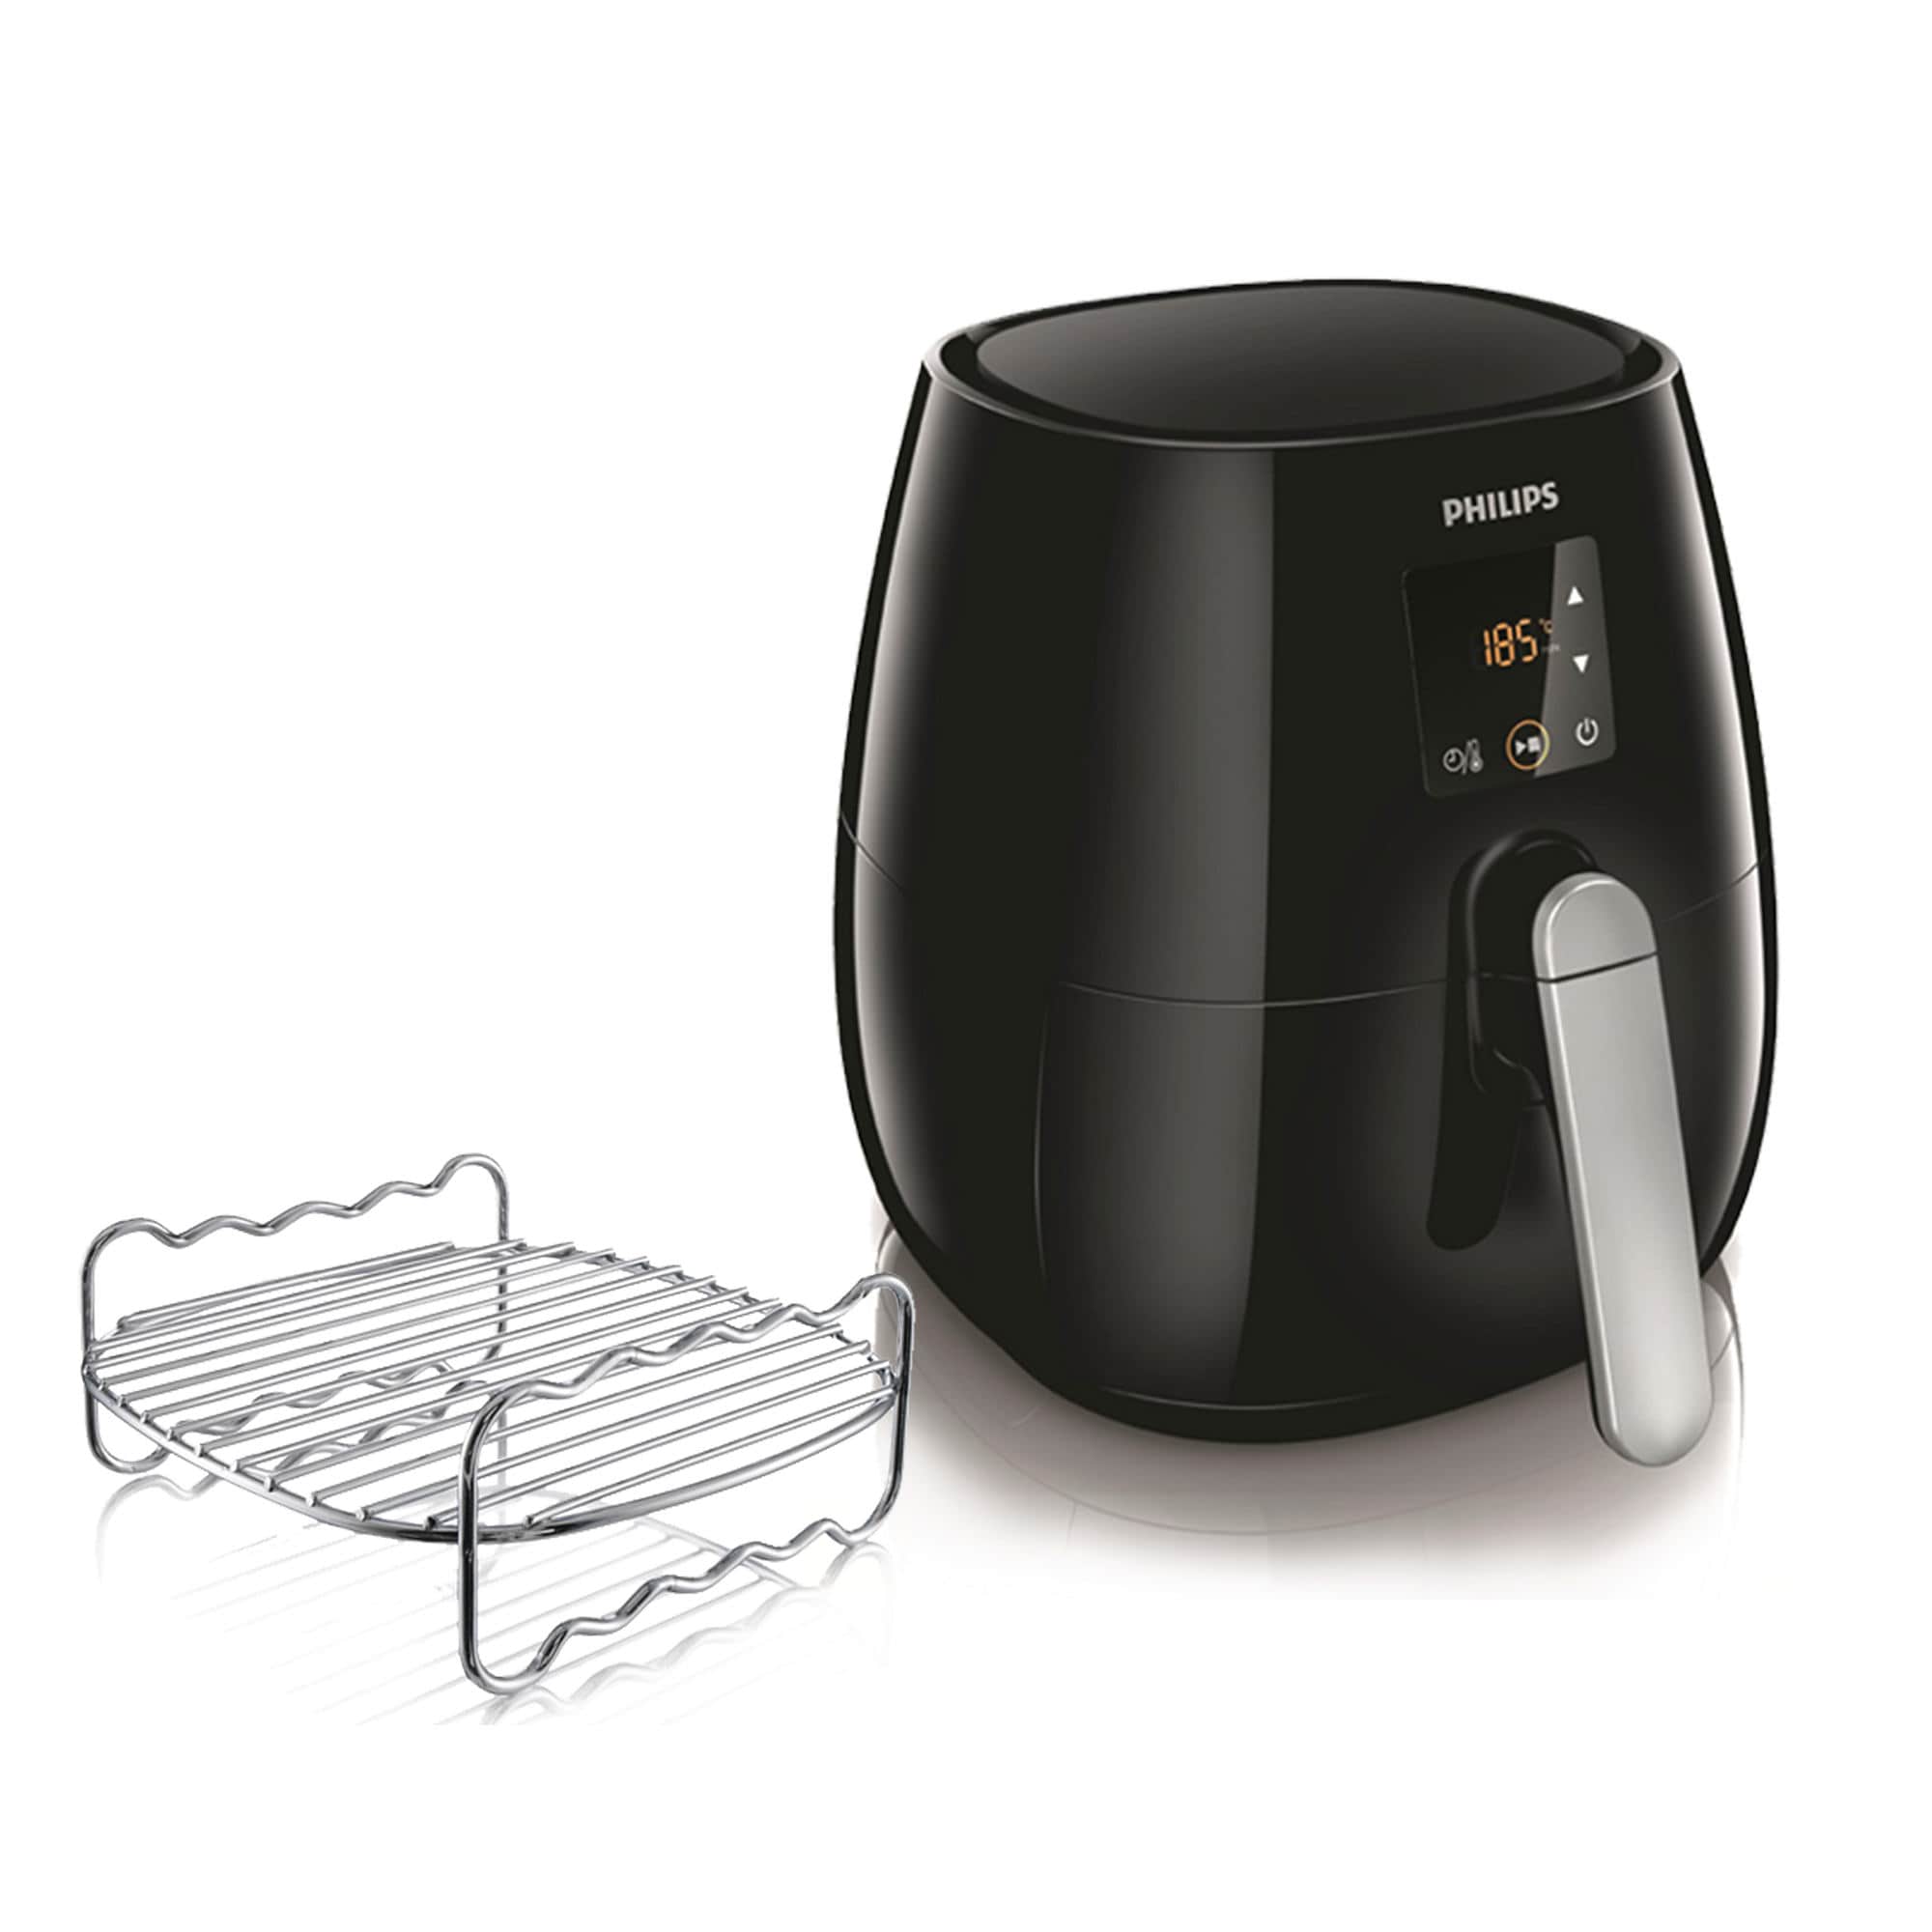 Rusland syg Eve Philips Viva Collection 1-Quart Ignition Electric Turkey Fryer at Lowes.com